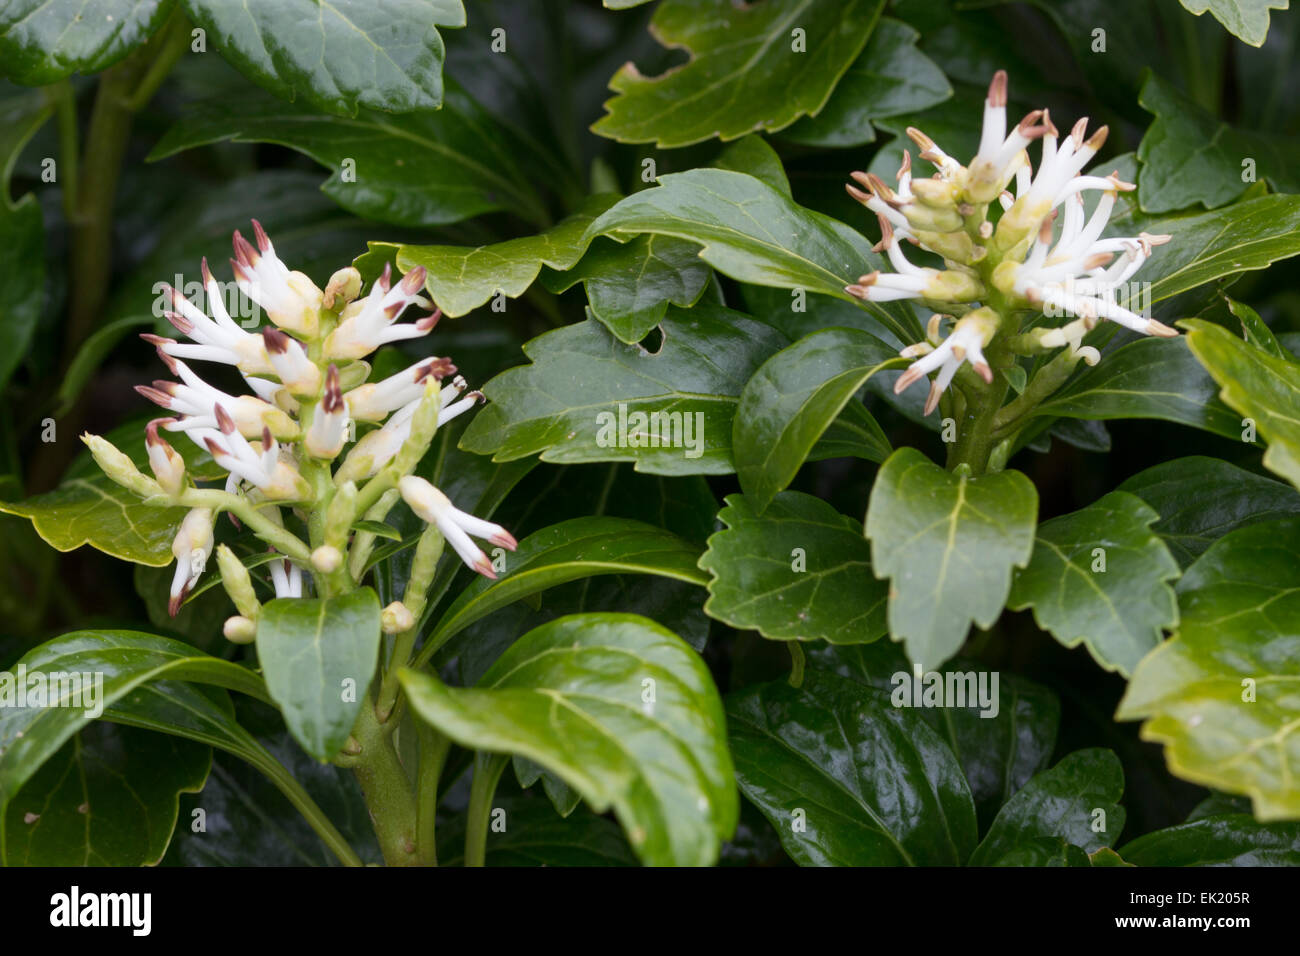 Early spring flowers of the evergreen carpeter, Pachysandra terminalis 'Green Carpet' Stock Photo